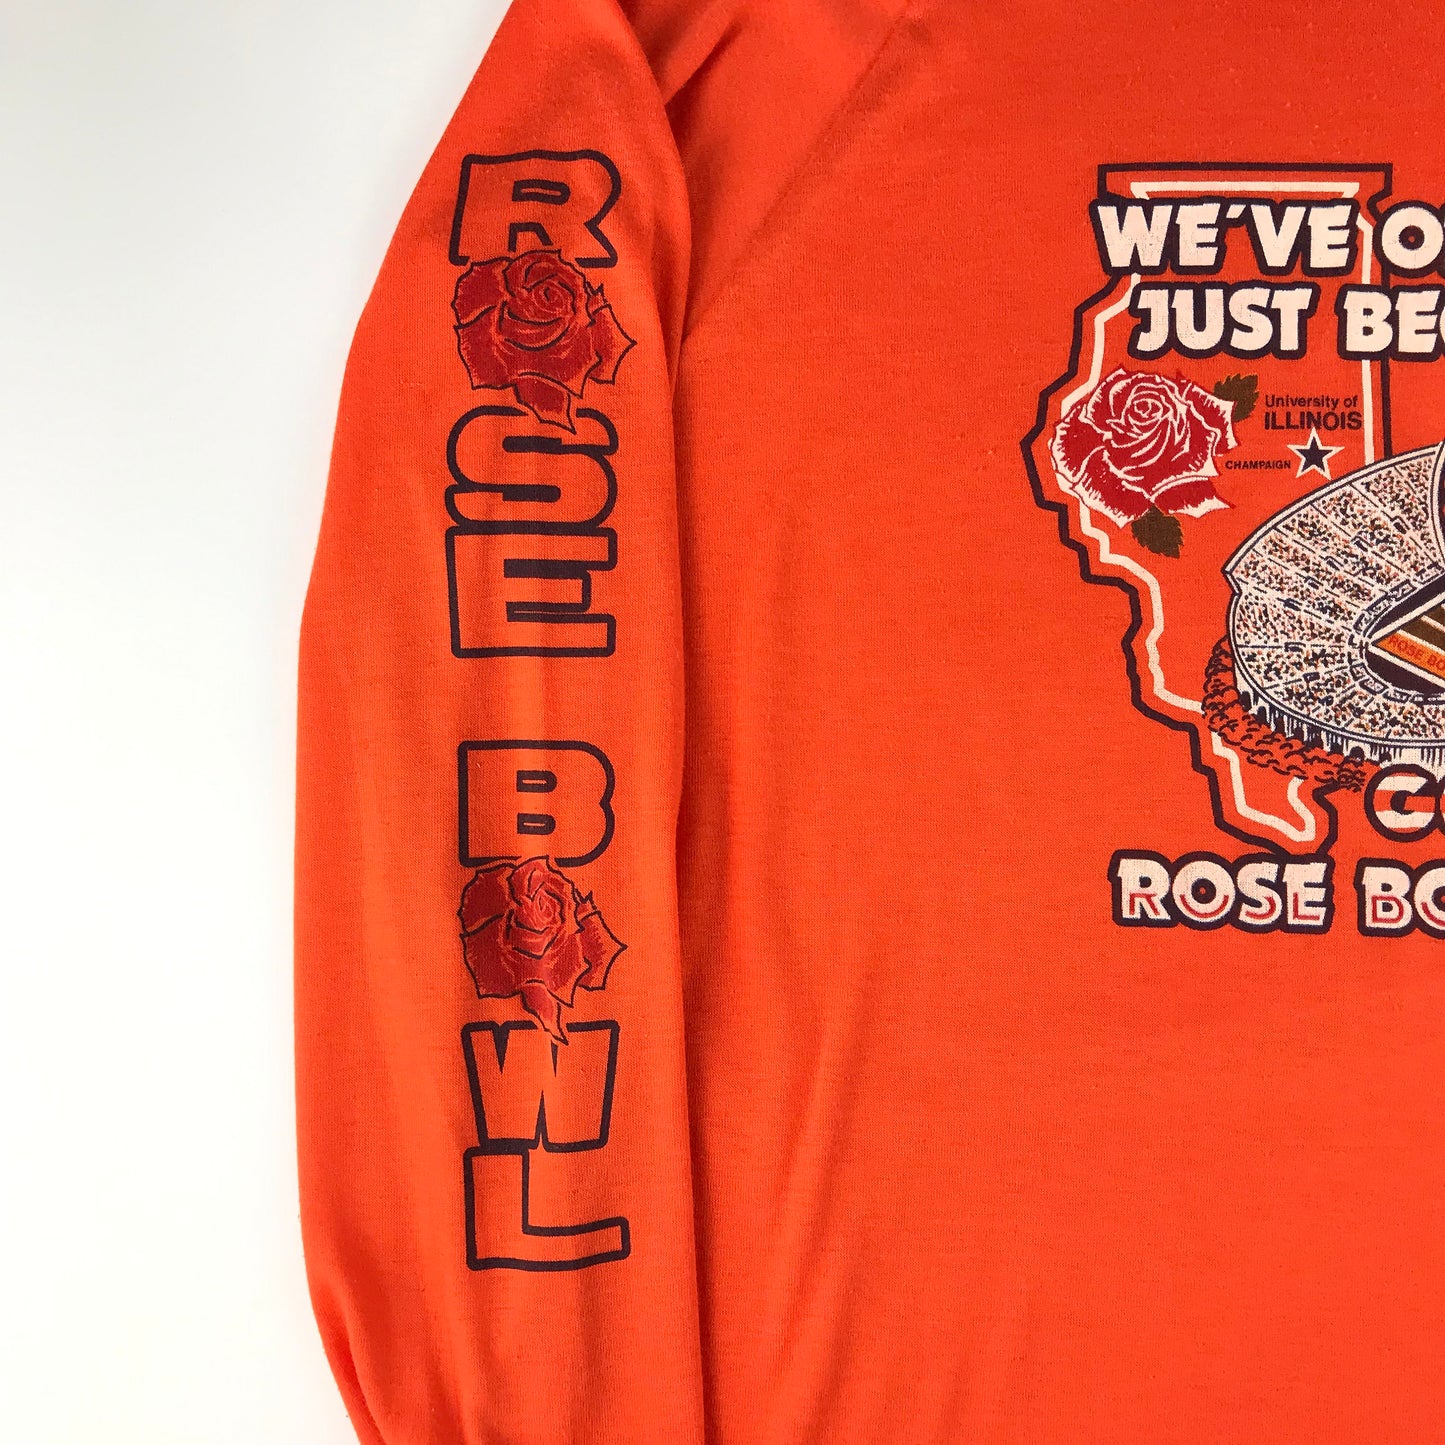 1980s 1984 University of Illinois College Football Rose Bowl Longsleeve T-Shirt Made in USA Size L